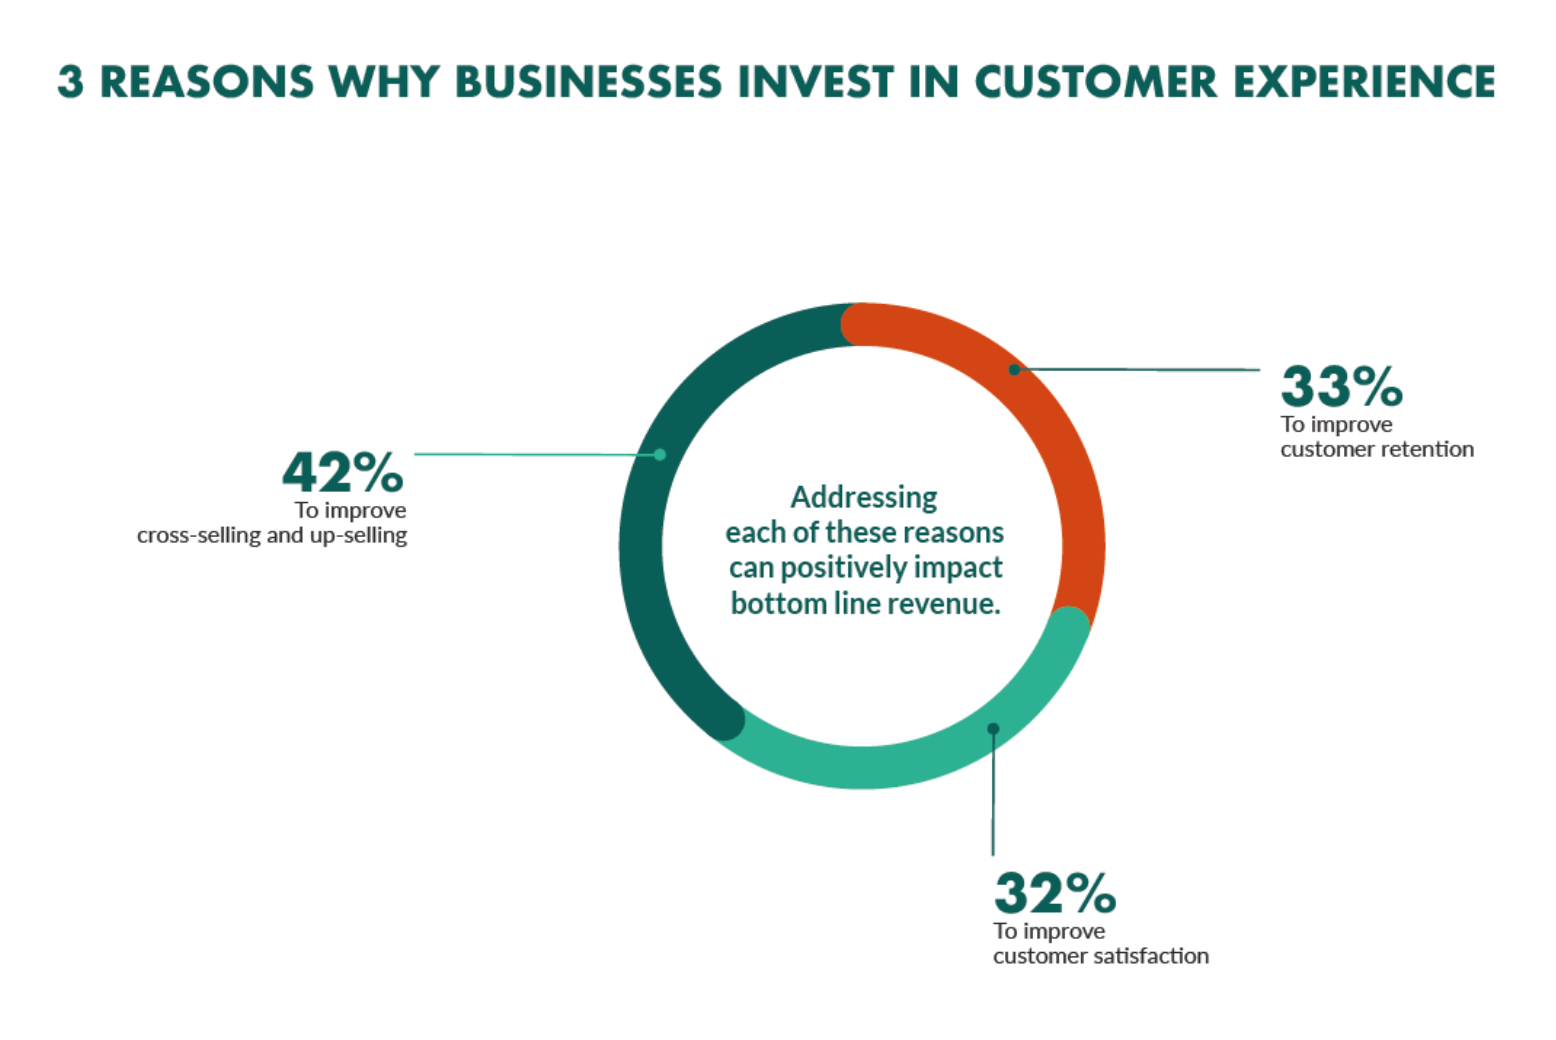 Addressing cross-selling and up-selling, customer satisfaction and customer retention can positively impact bottom line revenue and are the main reasons why businesses invest in customer experience. 42% invest because it's to improve cross-selling and up-selling, 33% to improve customer retention and 32% to improve customer satisfaction.